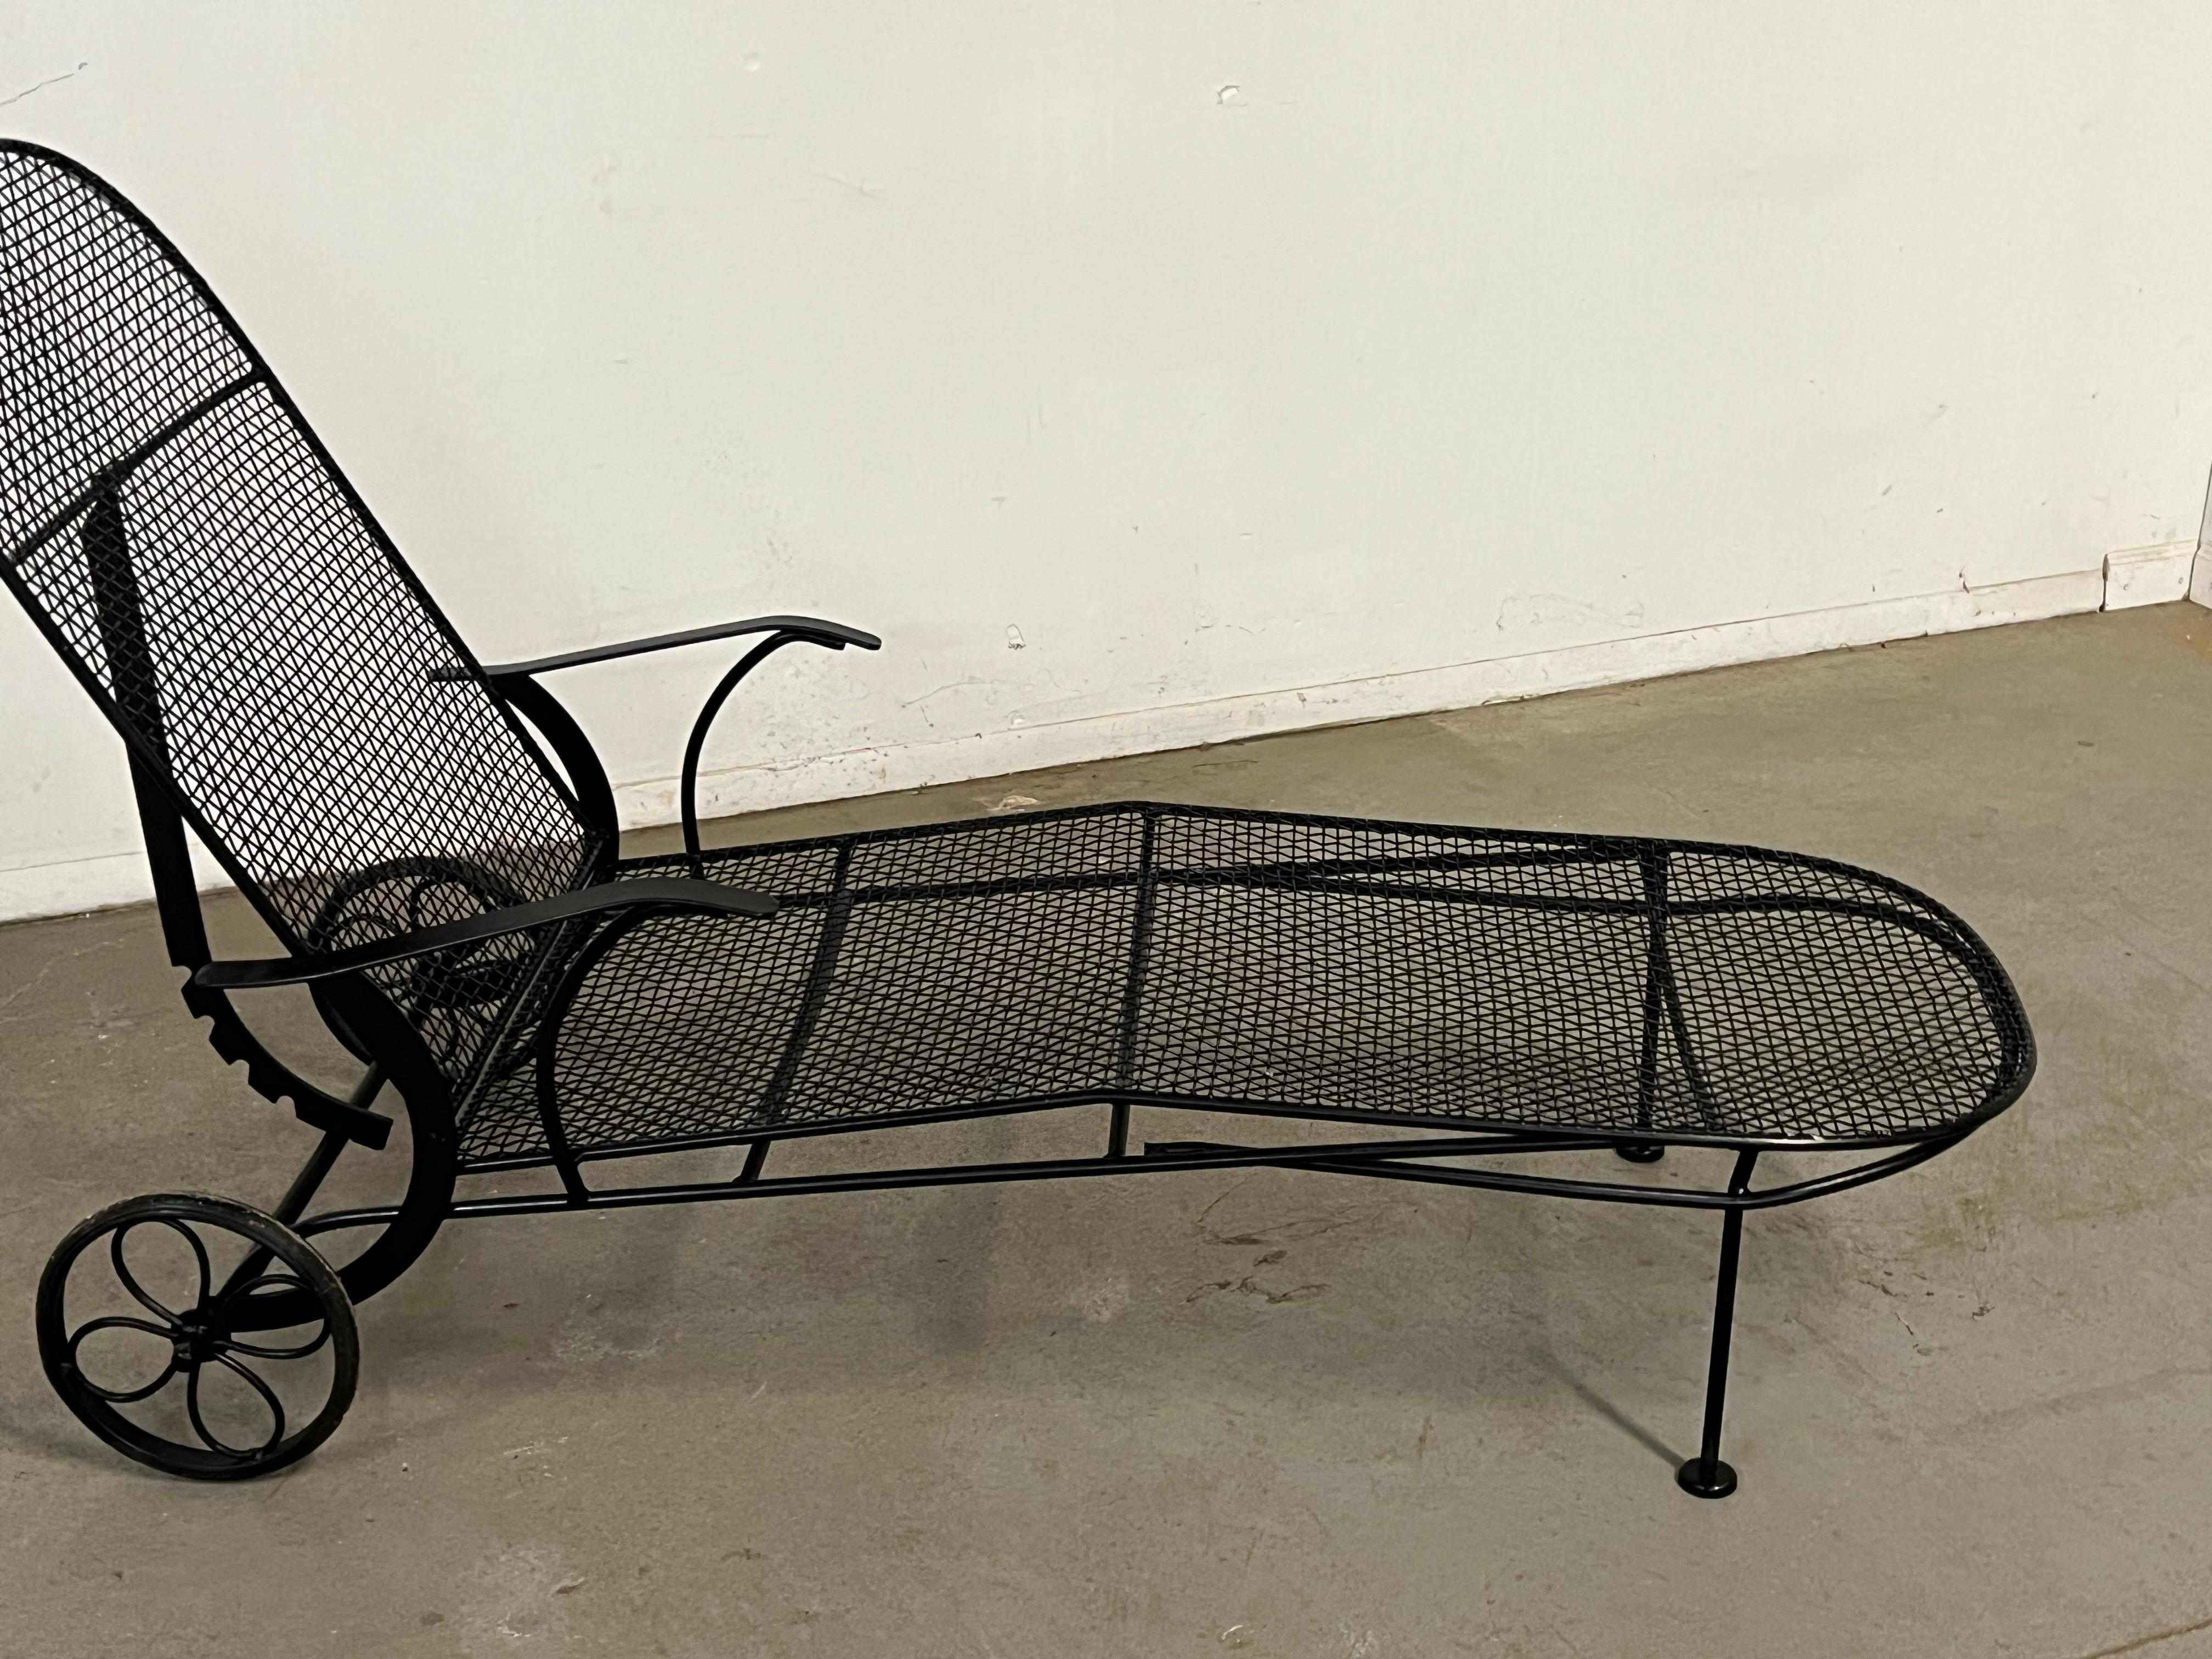 Mid Century Modern Woodard Scupltura Mesh Outdoor Chaise Lounge Chair

Offered is a Mid Century Modern Woodard Scupltura Mesh Outdoor Chaise Lounge Chair. This chair is in overall good structural condition with paint chipping and age wear. Features